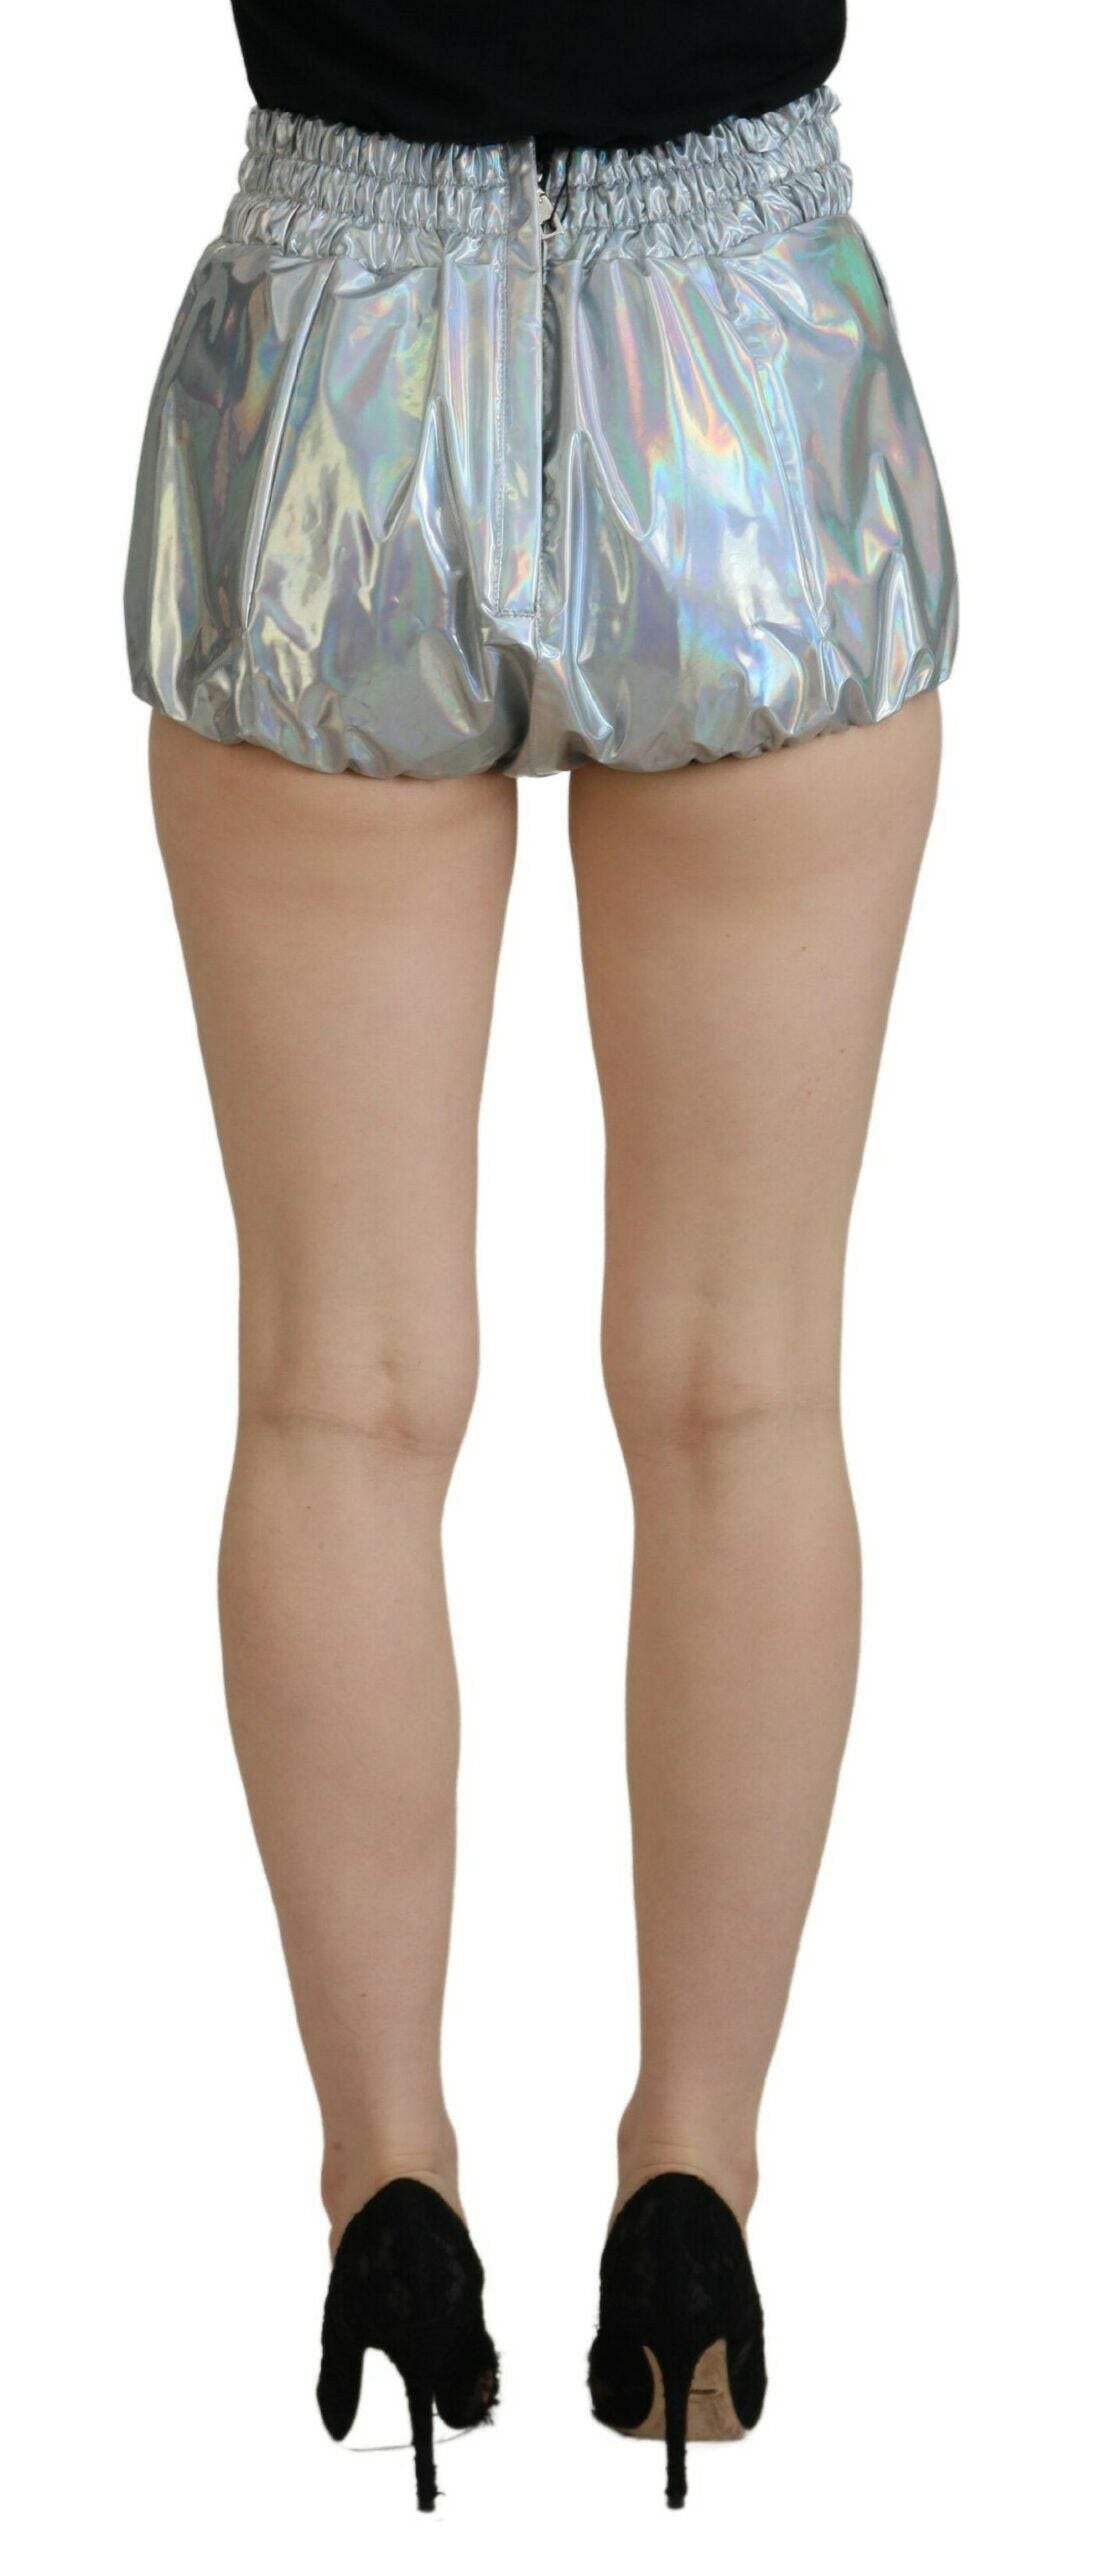 Dolce & Gabbana Silver Holographic High Waist Hot Pants Shorts - GENUINE AUTHENTIC BRAND LLC  